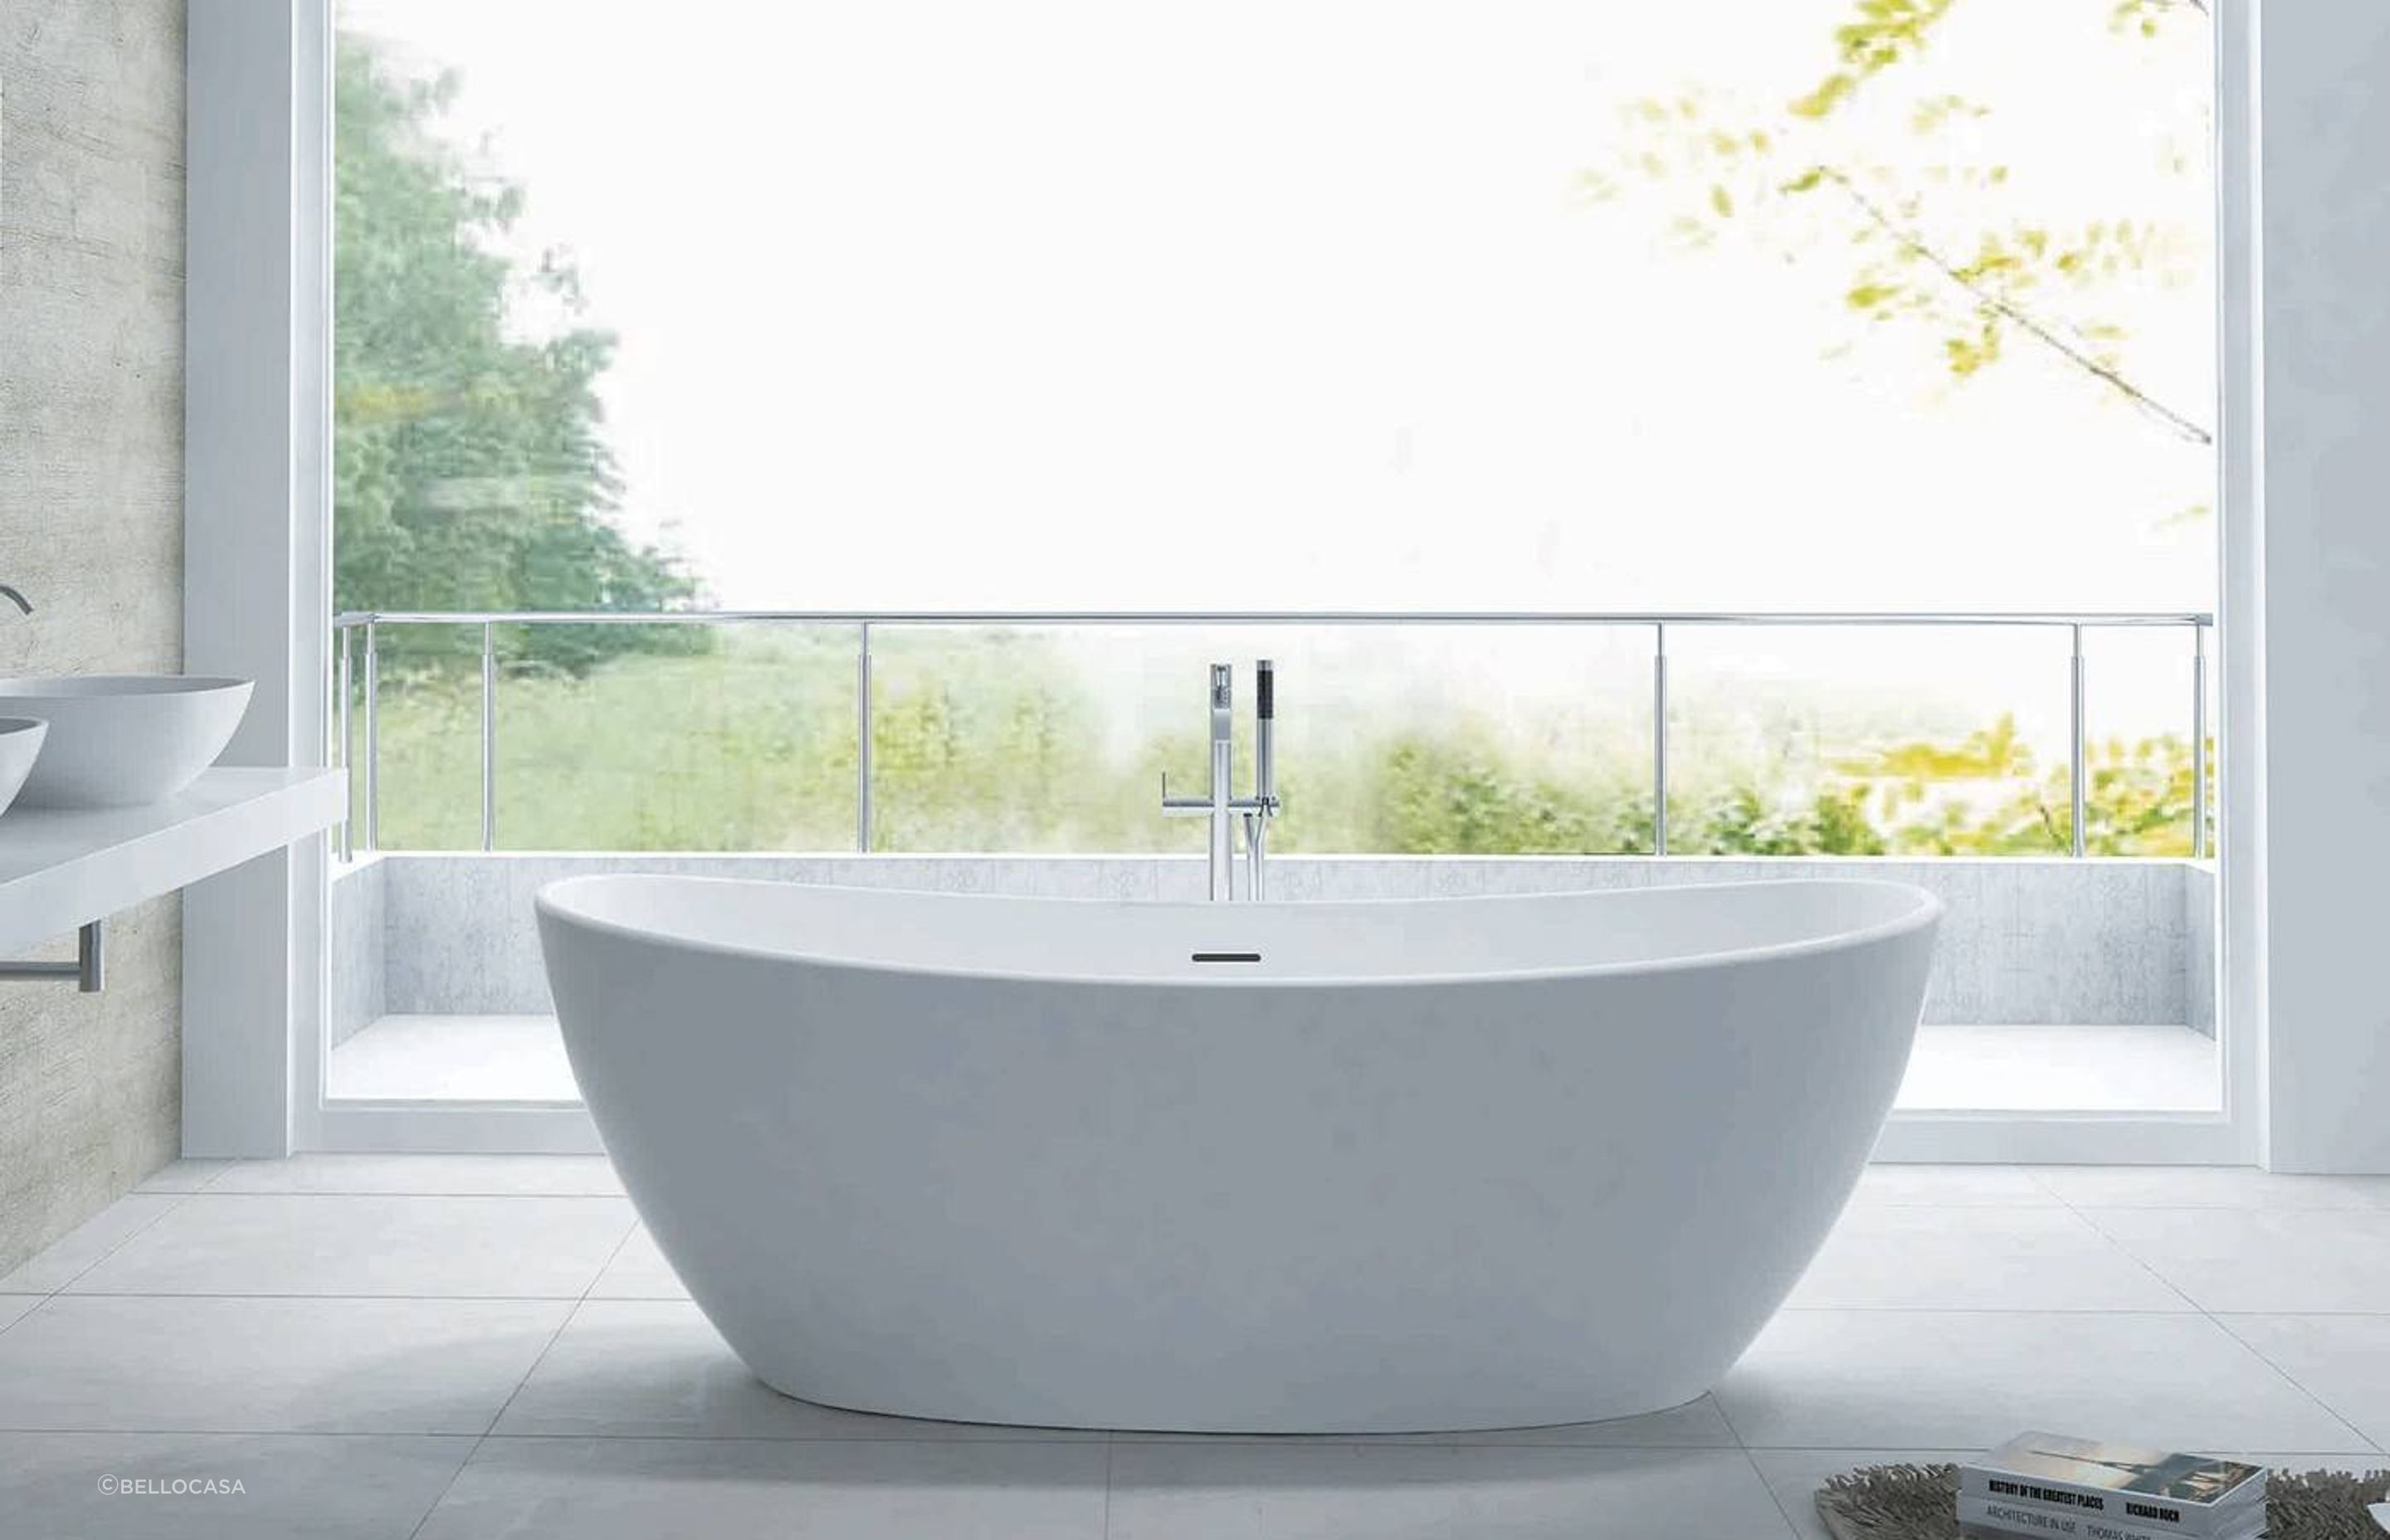 With its high edges and sleek round shape the Marcella Bath by BelloCasa is perfect for any large bathroom space